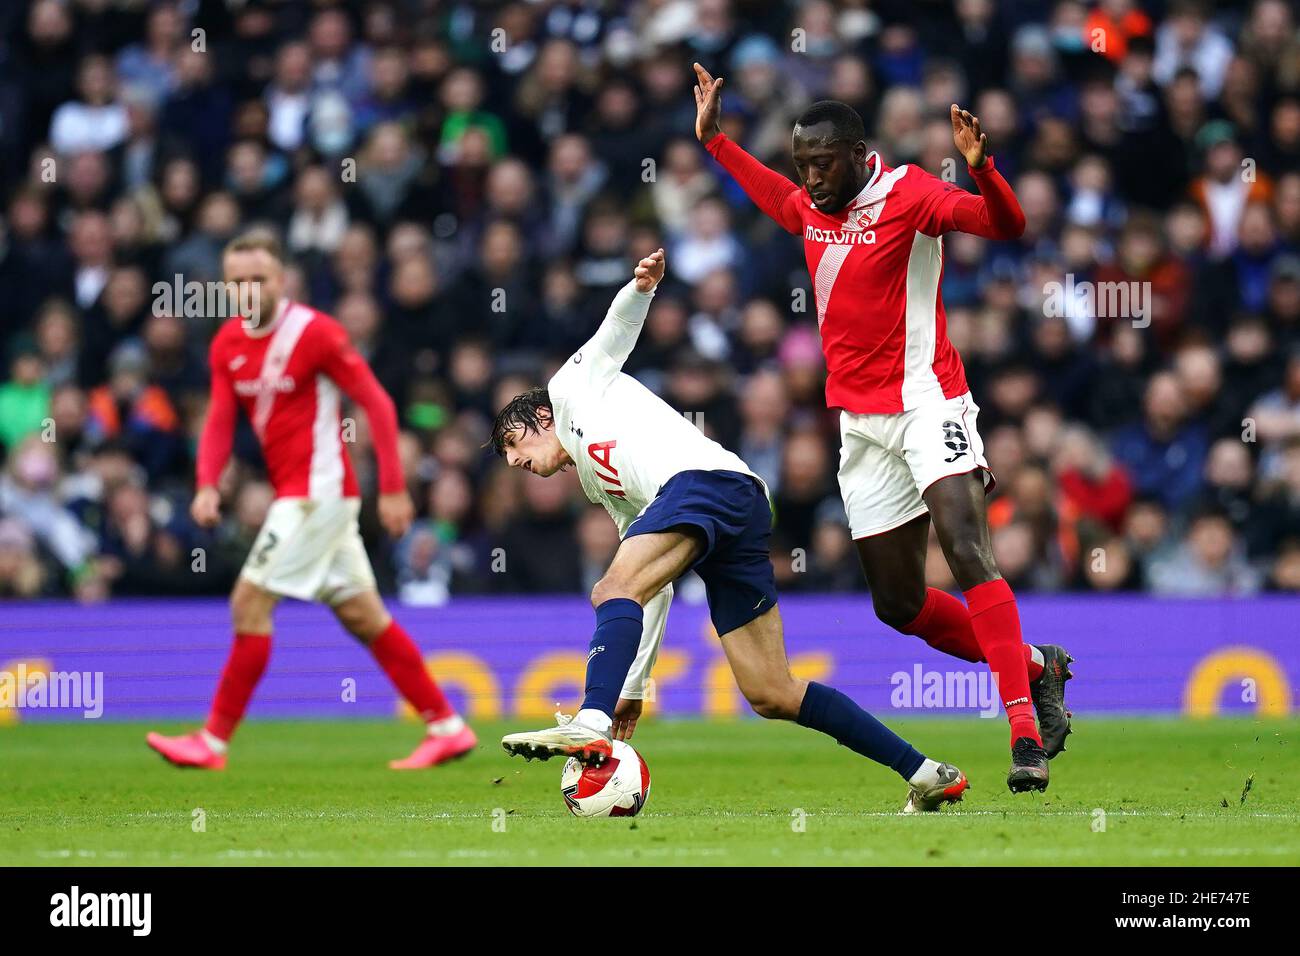 Tottenham Hotspur's Bryan Gil Salvatierra (centre) and Morcambe's Toumani Diagouraga (right) battle for the ball during the Emirates FA Cup third round match at Tottenham Hotspur Stadium, London. Picture date: Sunday January 9, 2022. Stock Photo